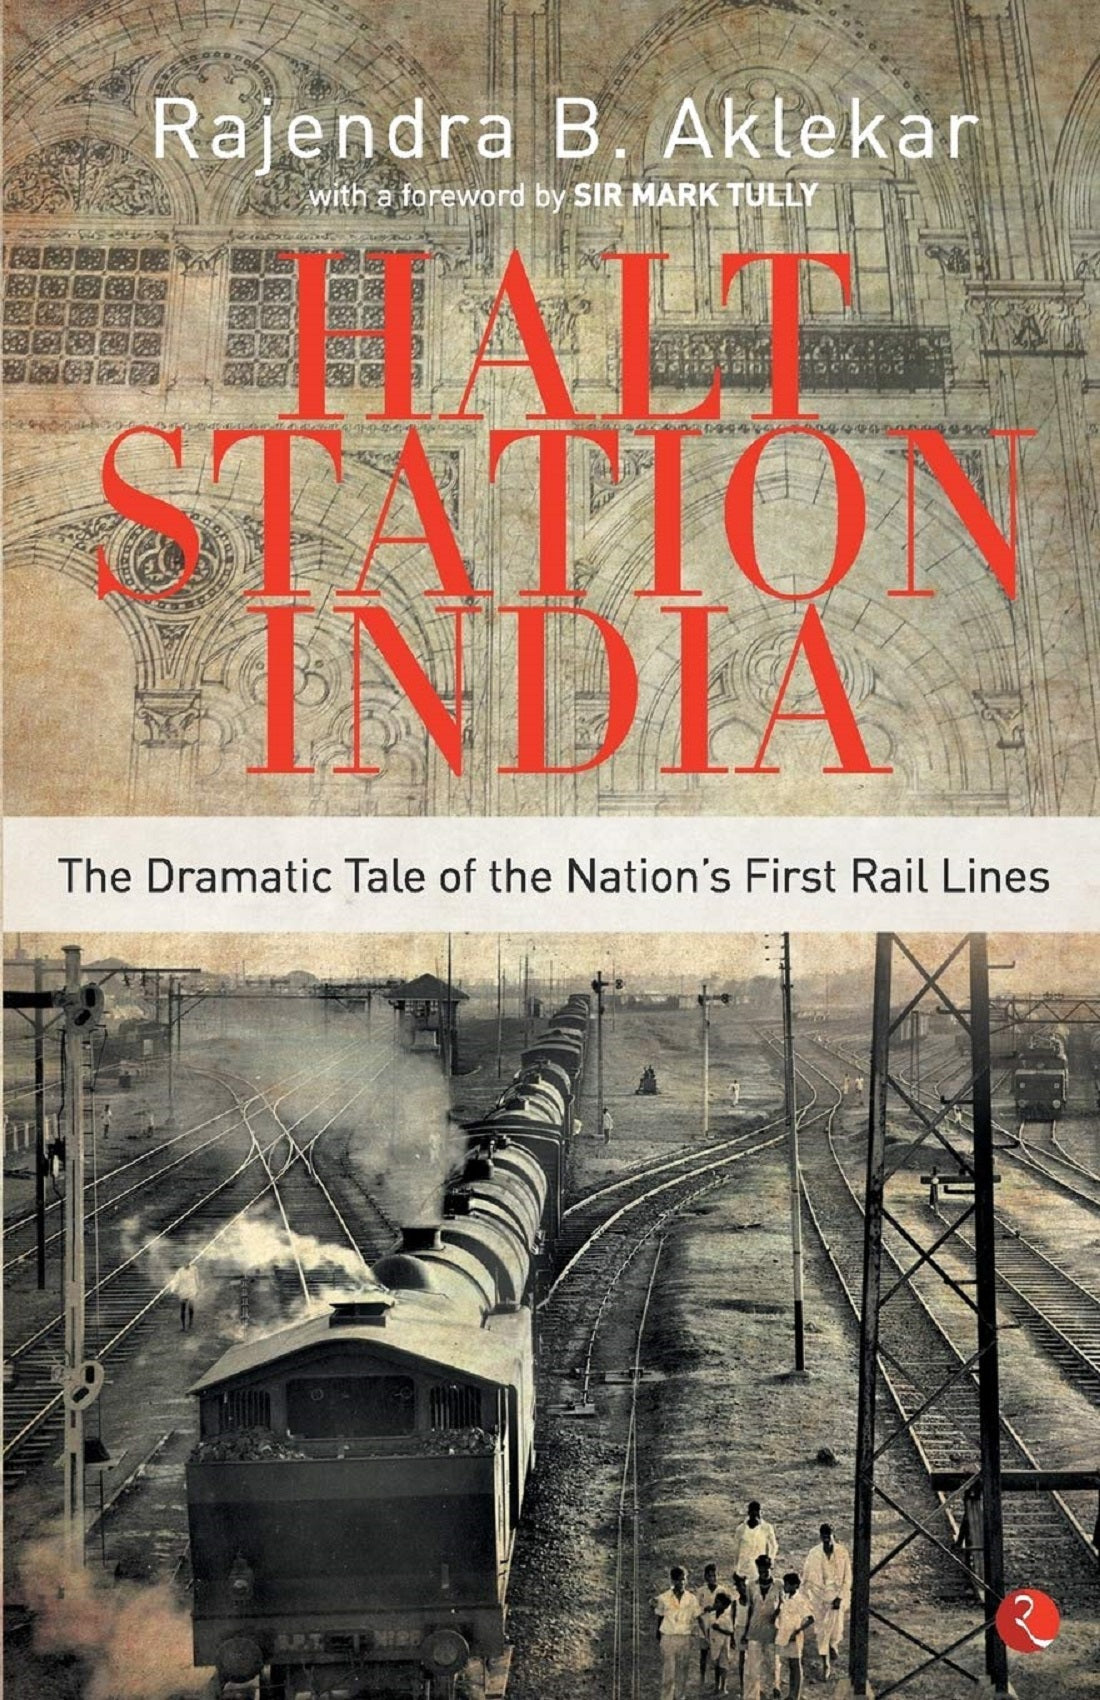 HALT STATION INDIA THE DRAMATIC TALE OF THE NATION'S FIRST RAIL LINES